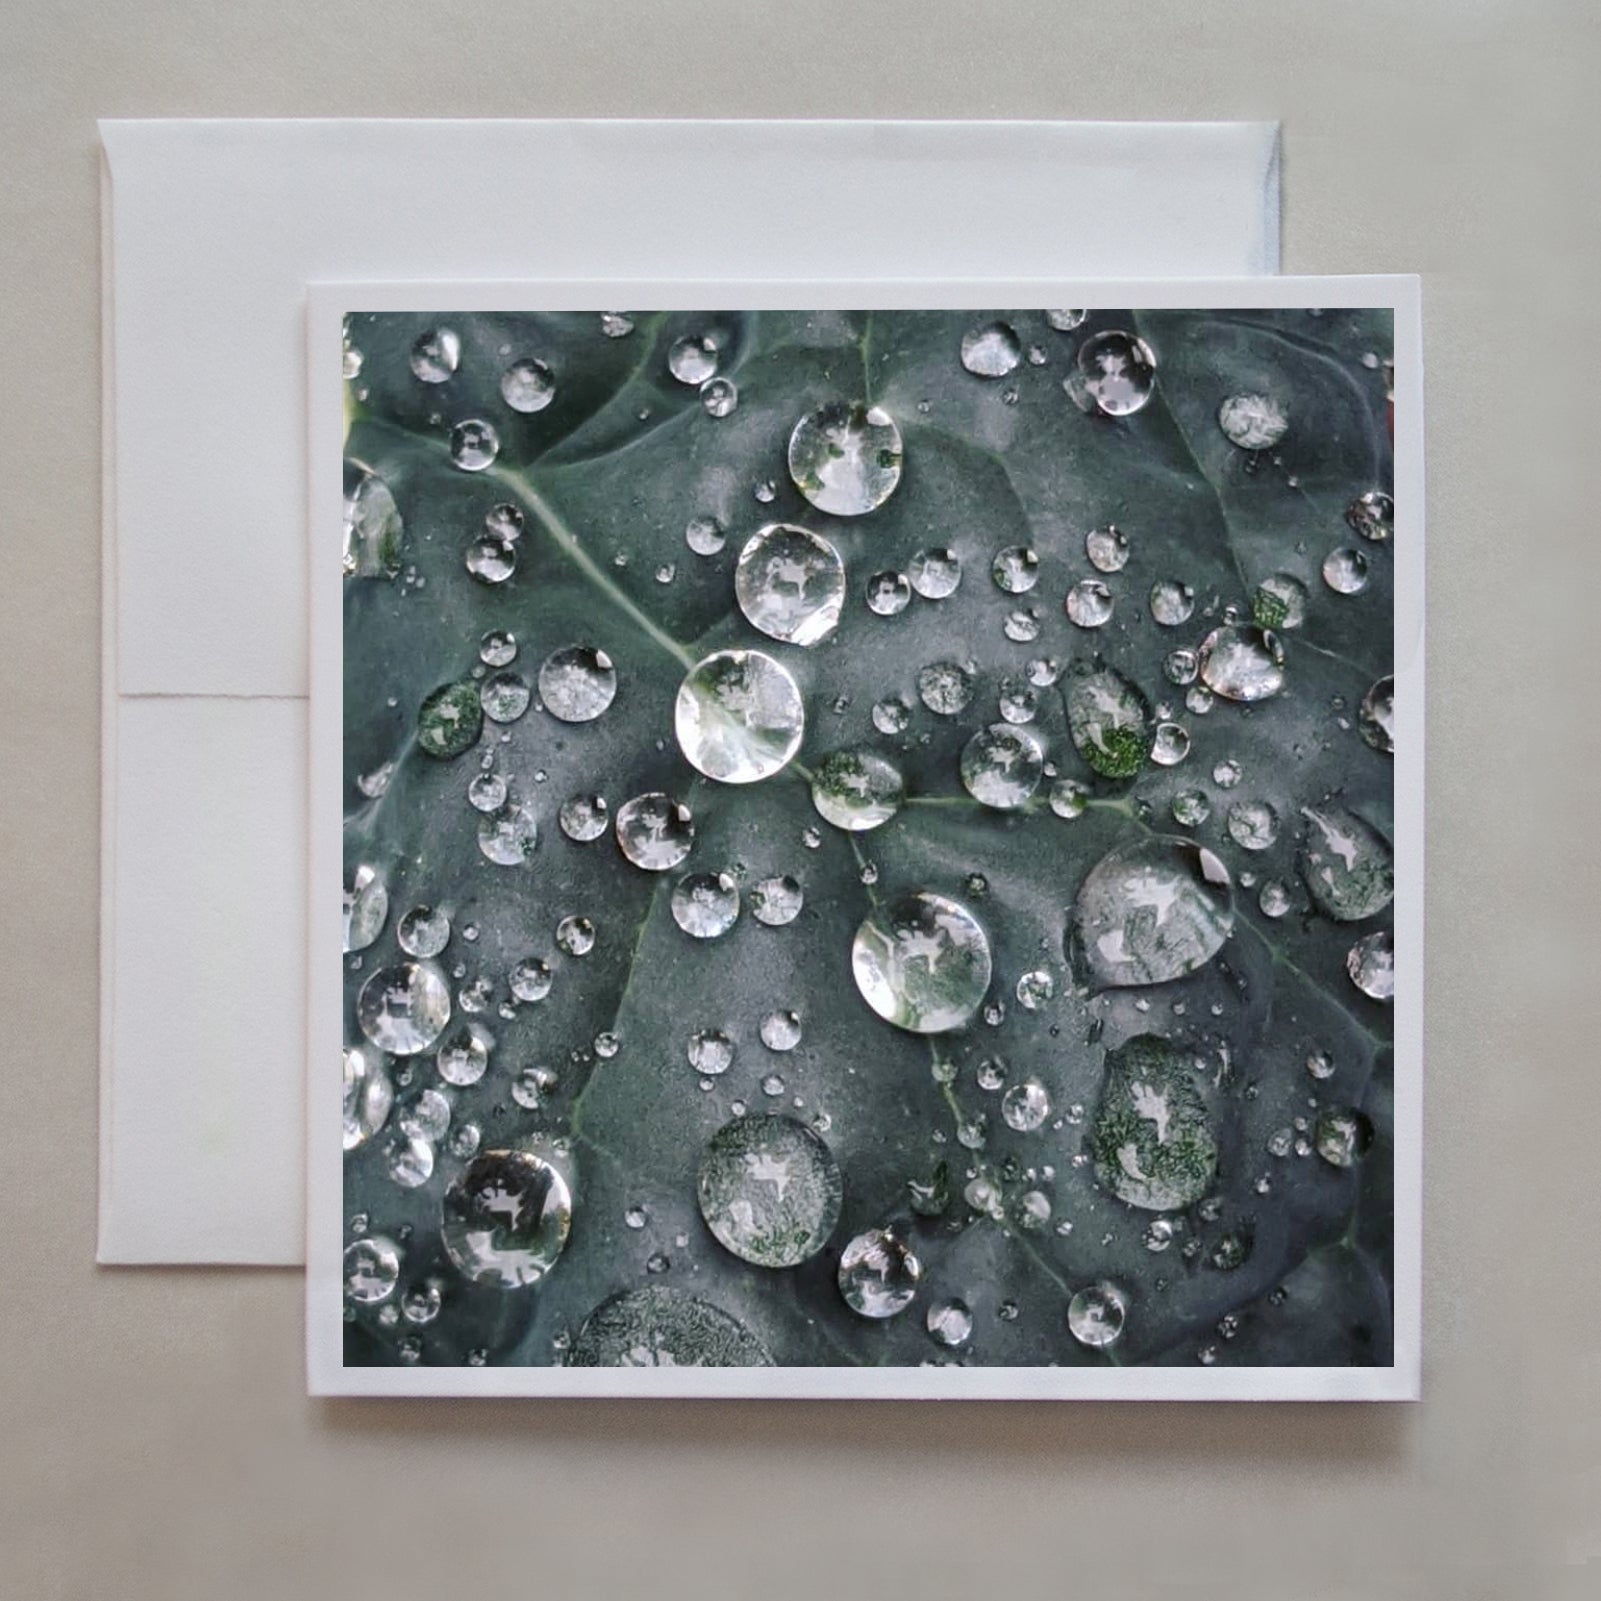 Rain water sits in big droplets on kale in this photo greeting card by photographer Jennifer Echols.